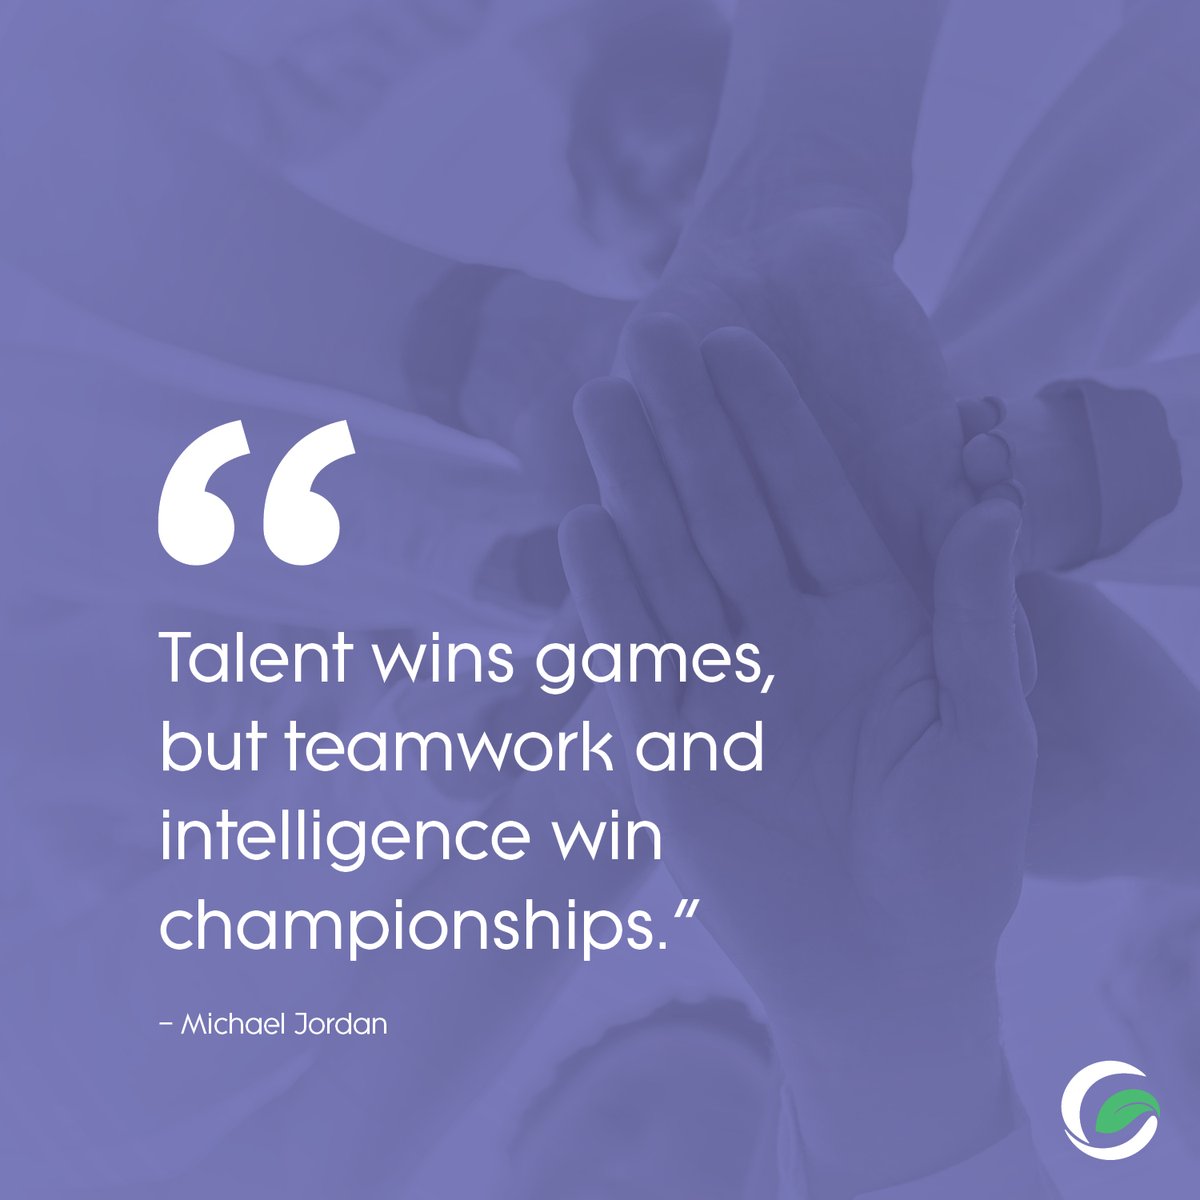 Working as a team will push us farther than working as individuals!

#EmpoweredTogether
#Quote
#GratoHoldings